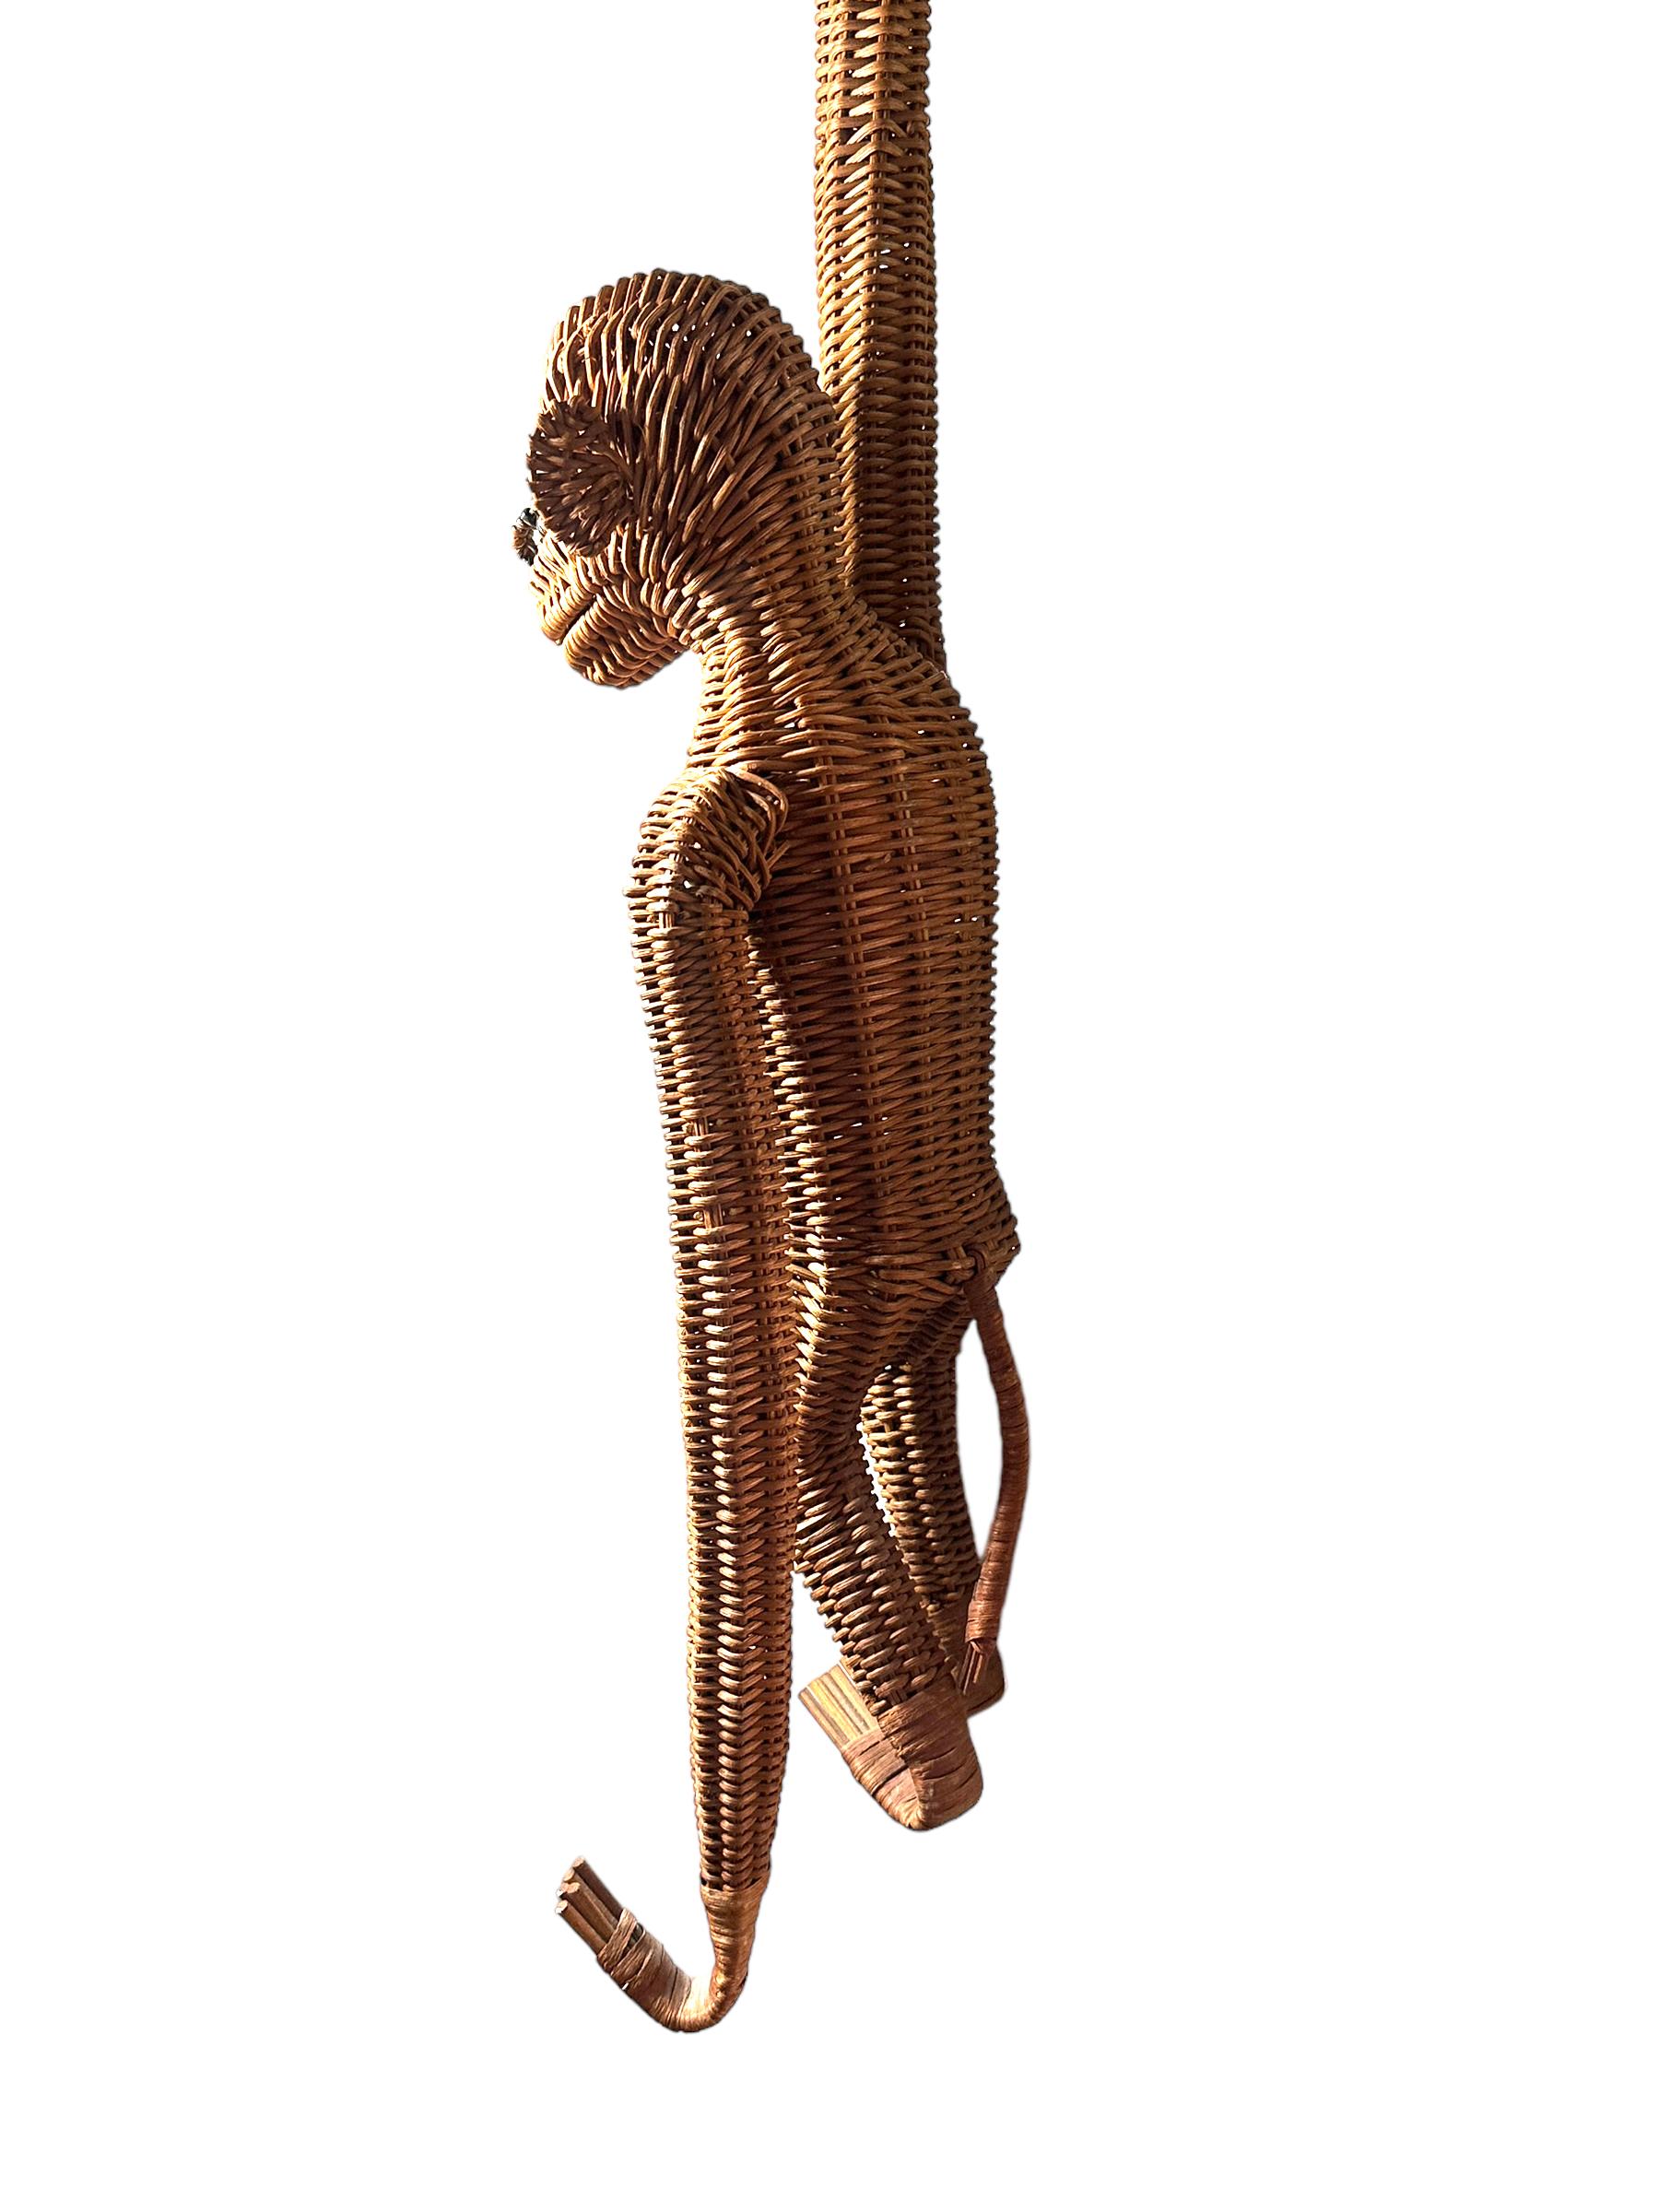 Hand-Crafted Mid-Century Modern Monkey Ape Rattan Wicker Hanging Figure 1970s, France For Sale